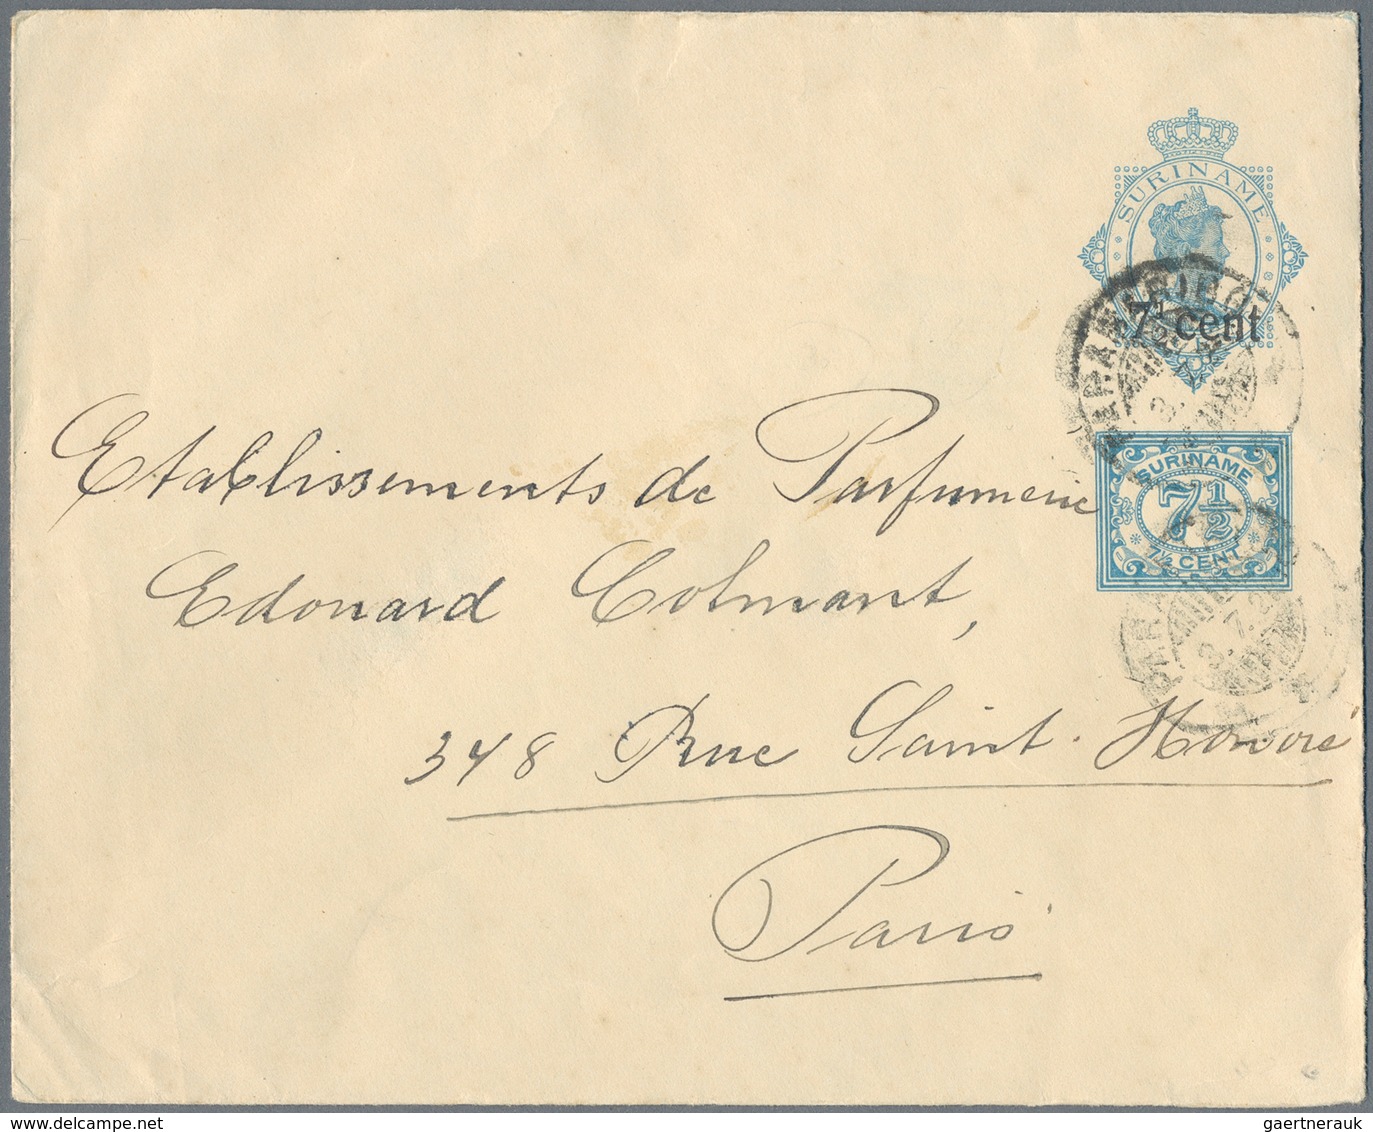 Curacao: 1884/1942, Covers (5), Used Ppc (2) And Used Stationery (11 Inc. Uprates) Inc. Registration - Niederländische Antillen, Curaçao, Aruba